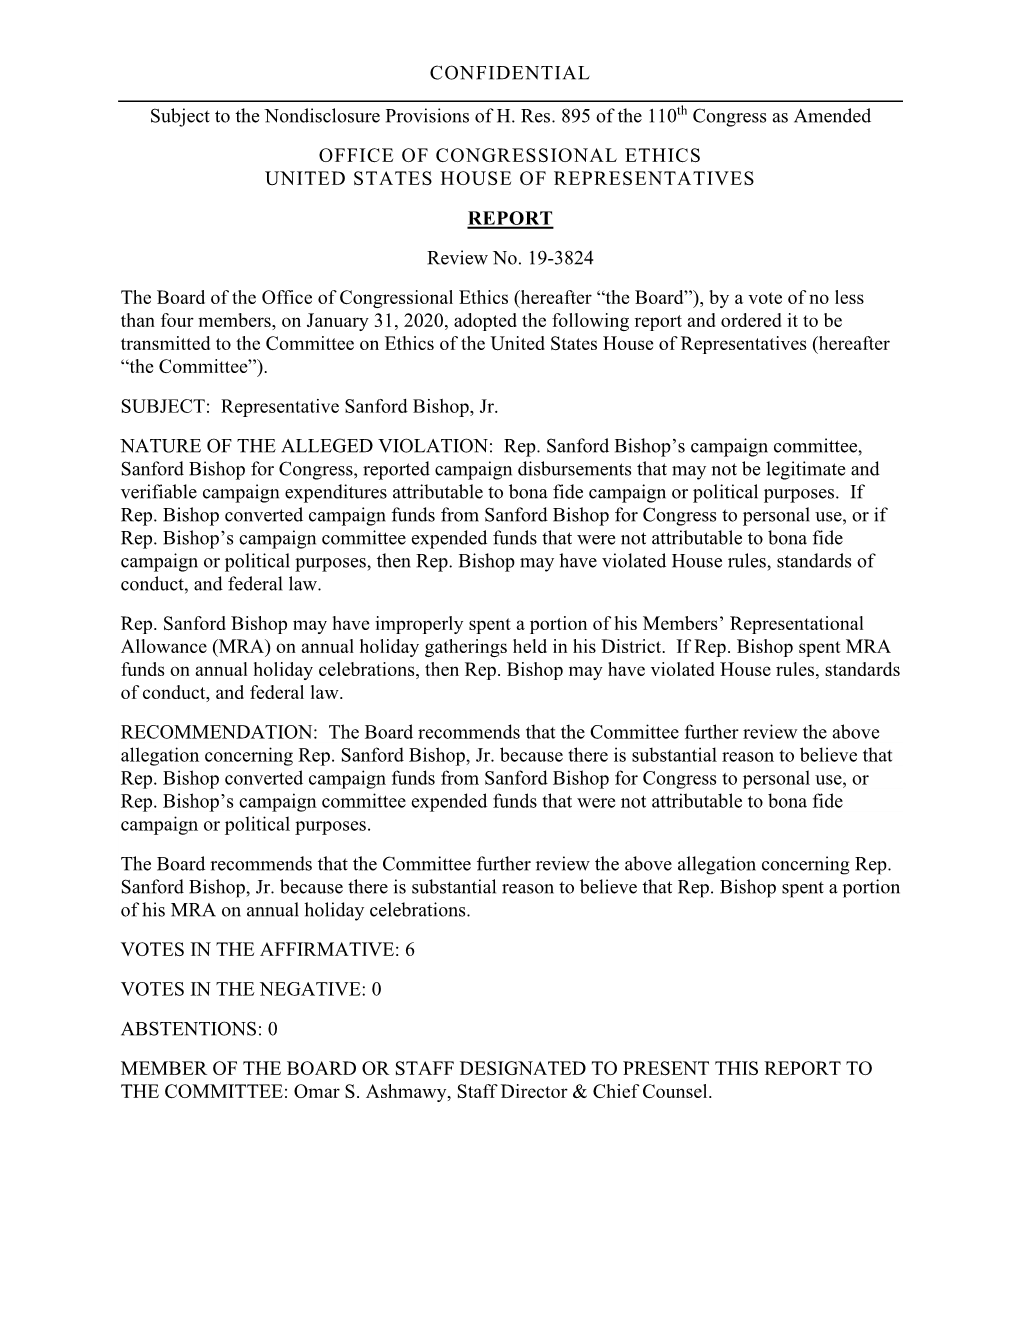 CONFIDENTIAL Subject to the Nondisclosure Provisions of H. Res. 895 of the 110Th Congress As Amended OFFICE of CONGRESSIONAL